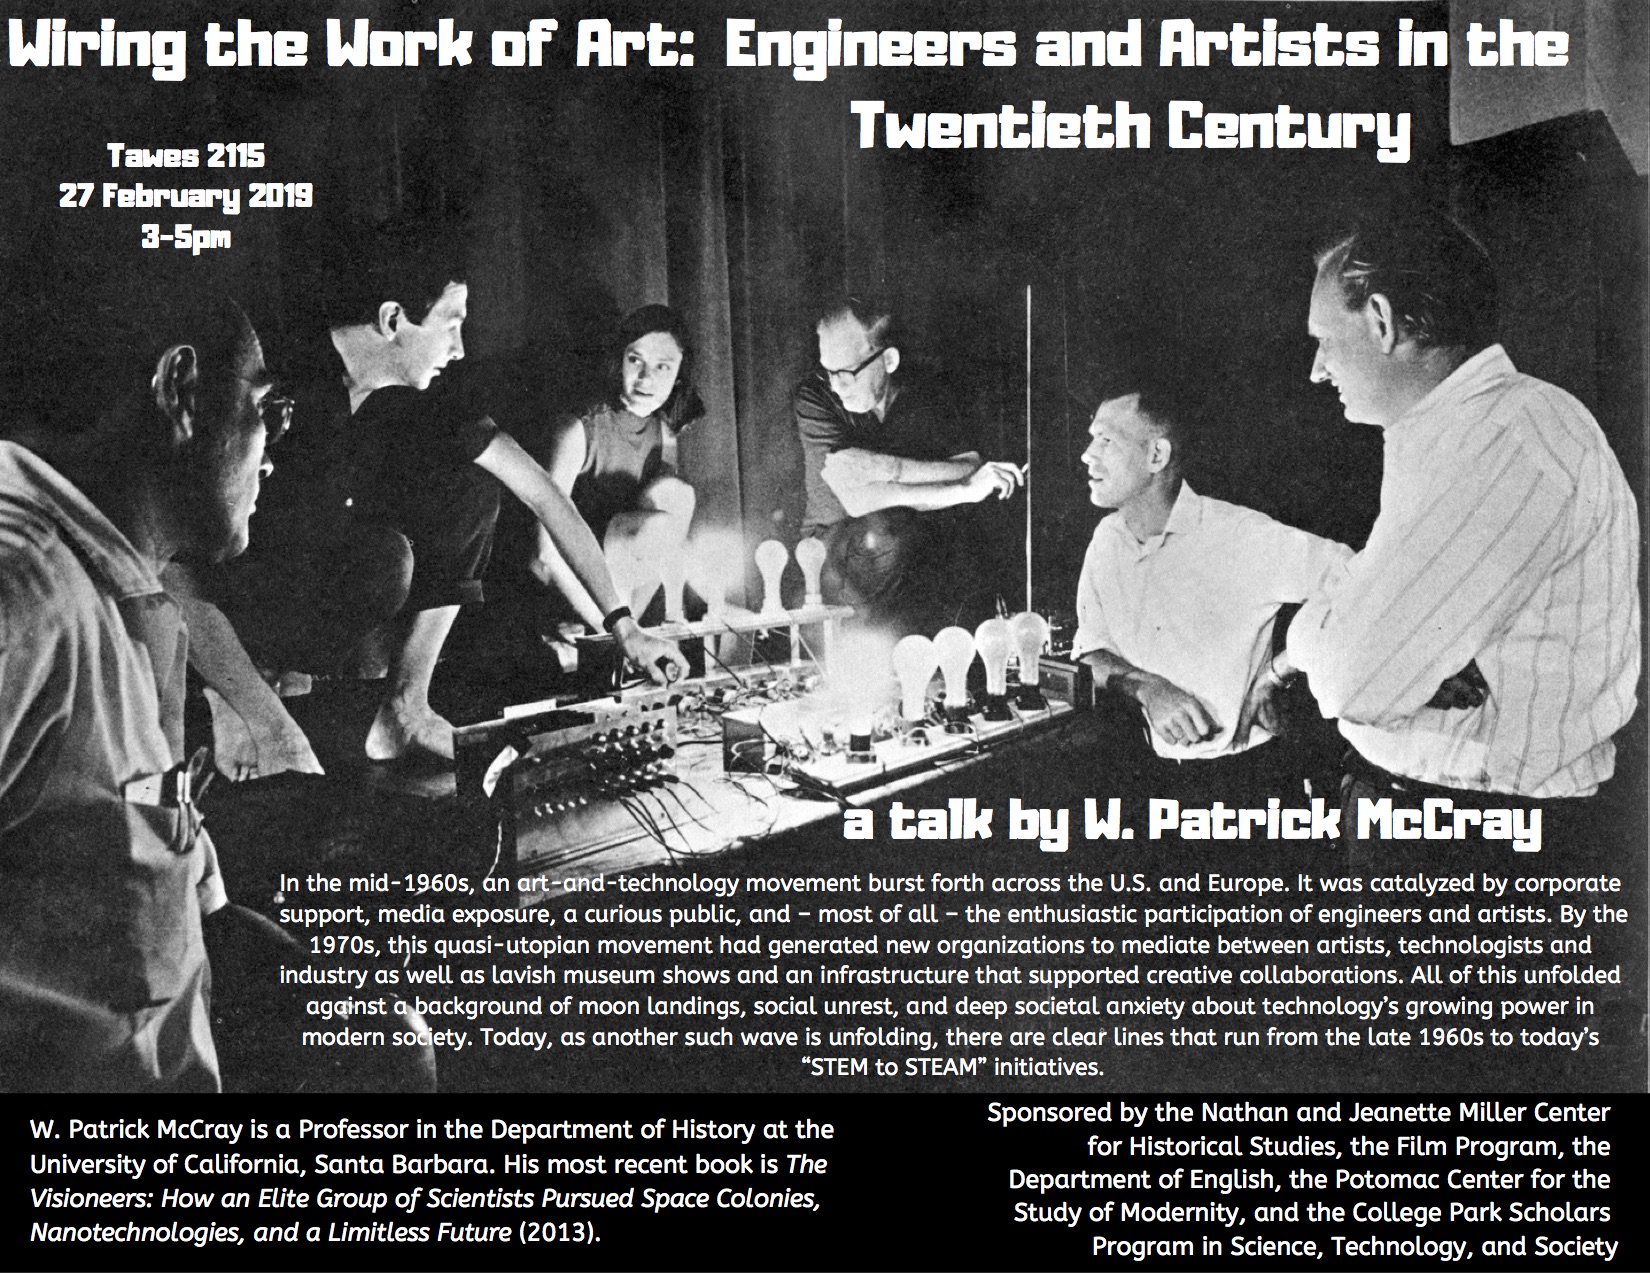 Image for event - Wiring the Work of Art: Engineers and Artists in the Twentieth Century